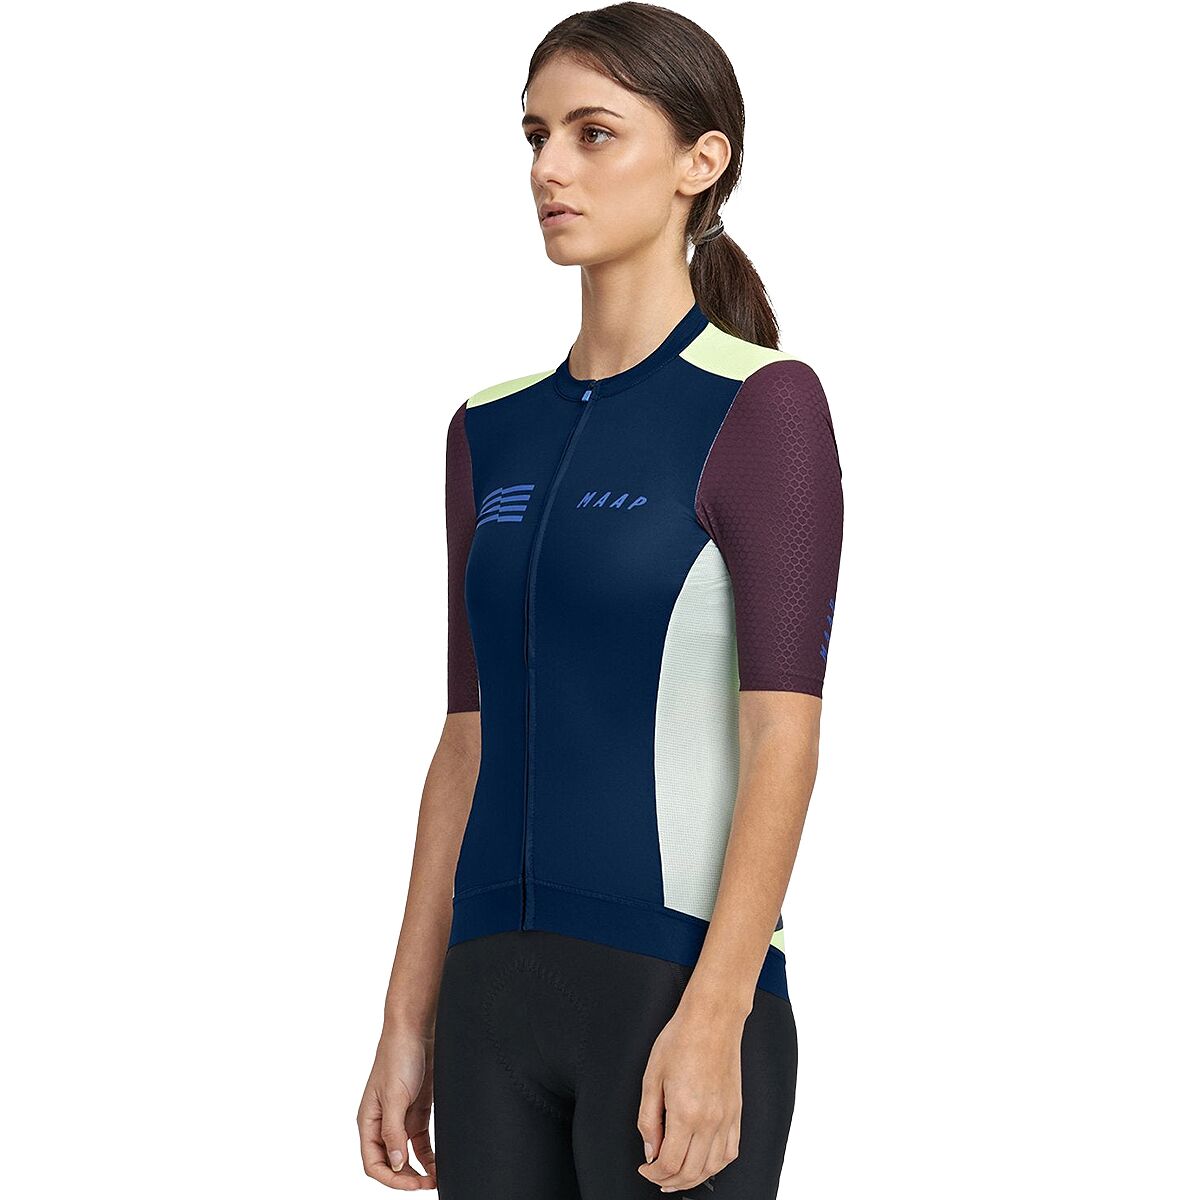 MP Emblem Pro Hex Jersey - Recycled - Women's